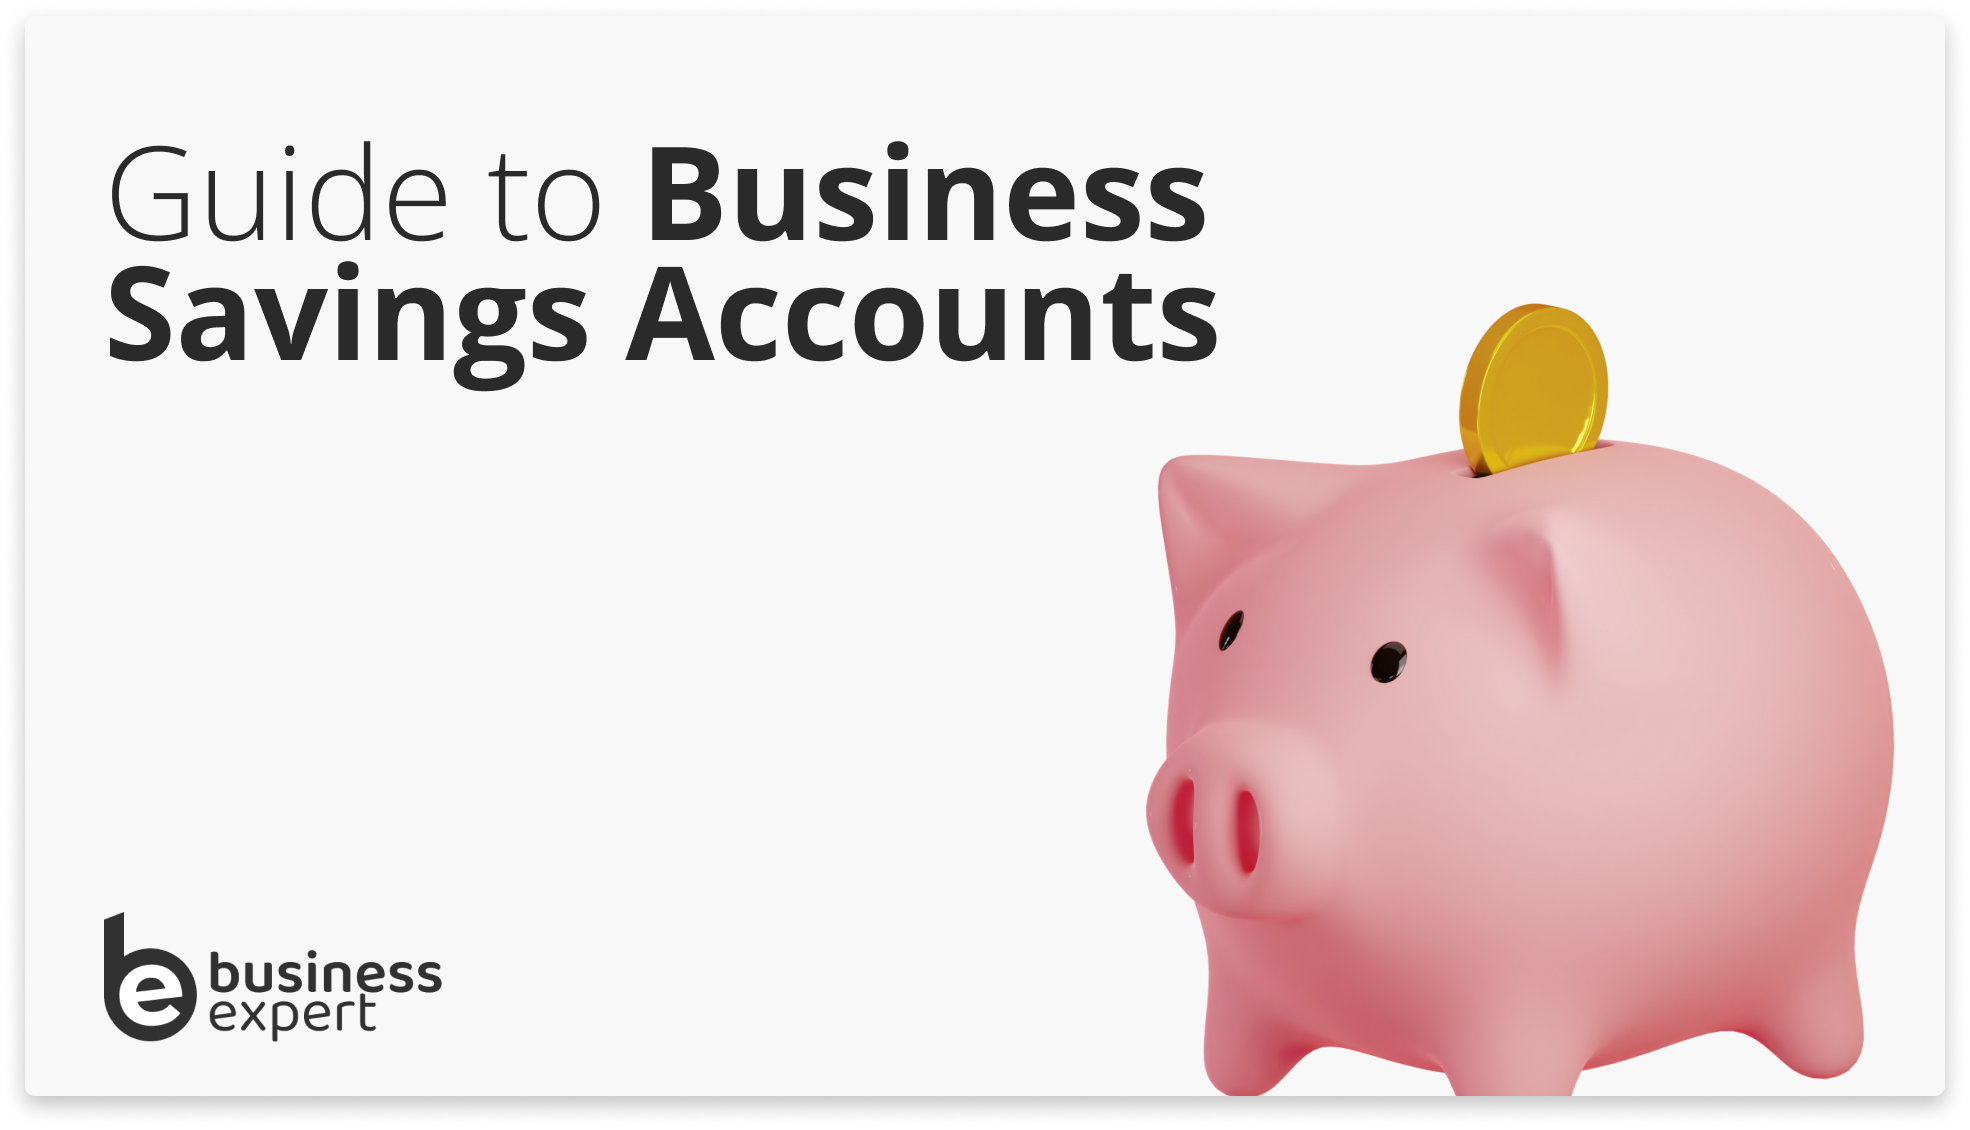 Guide to Business Savings Accounts